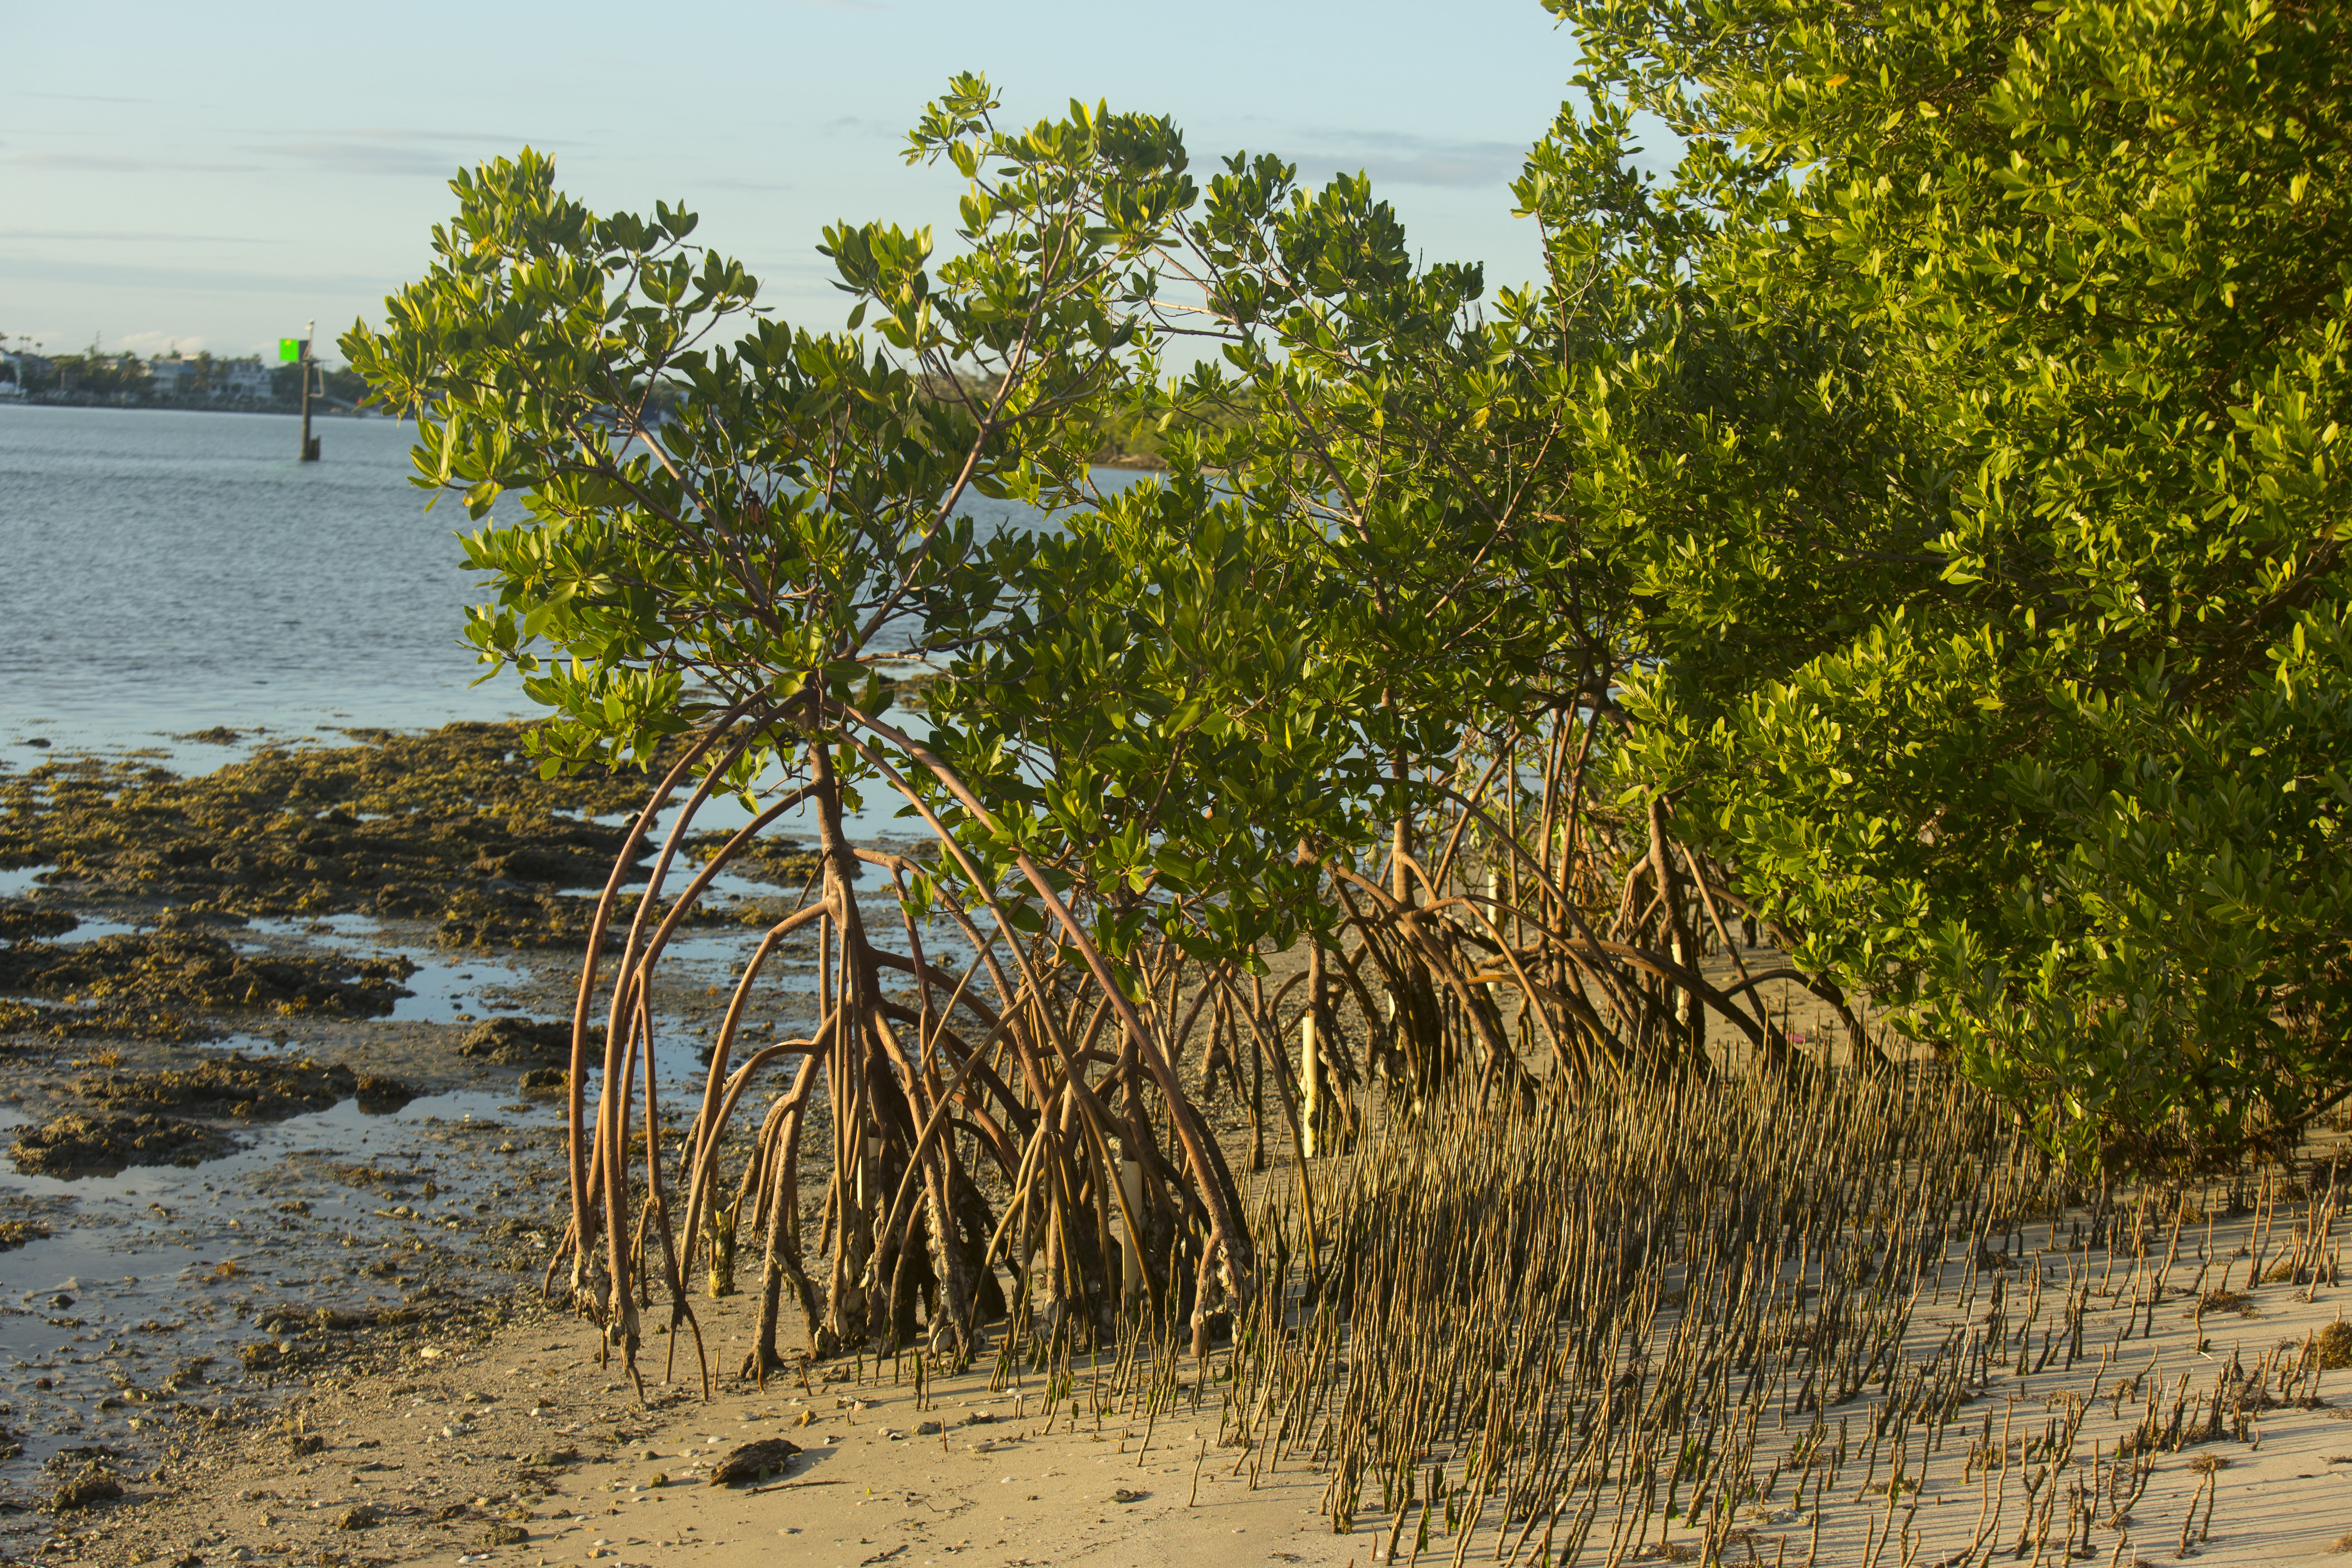 Mangroves with exposed roots stand in sandy soil.